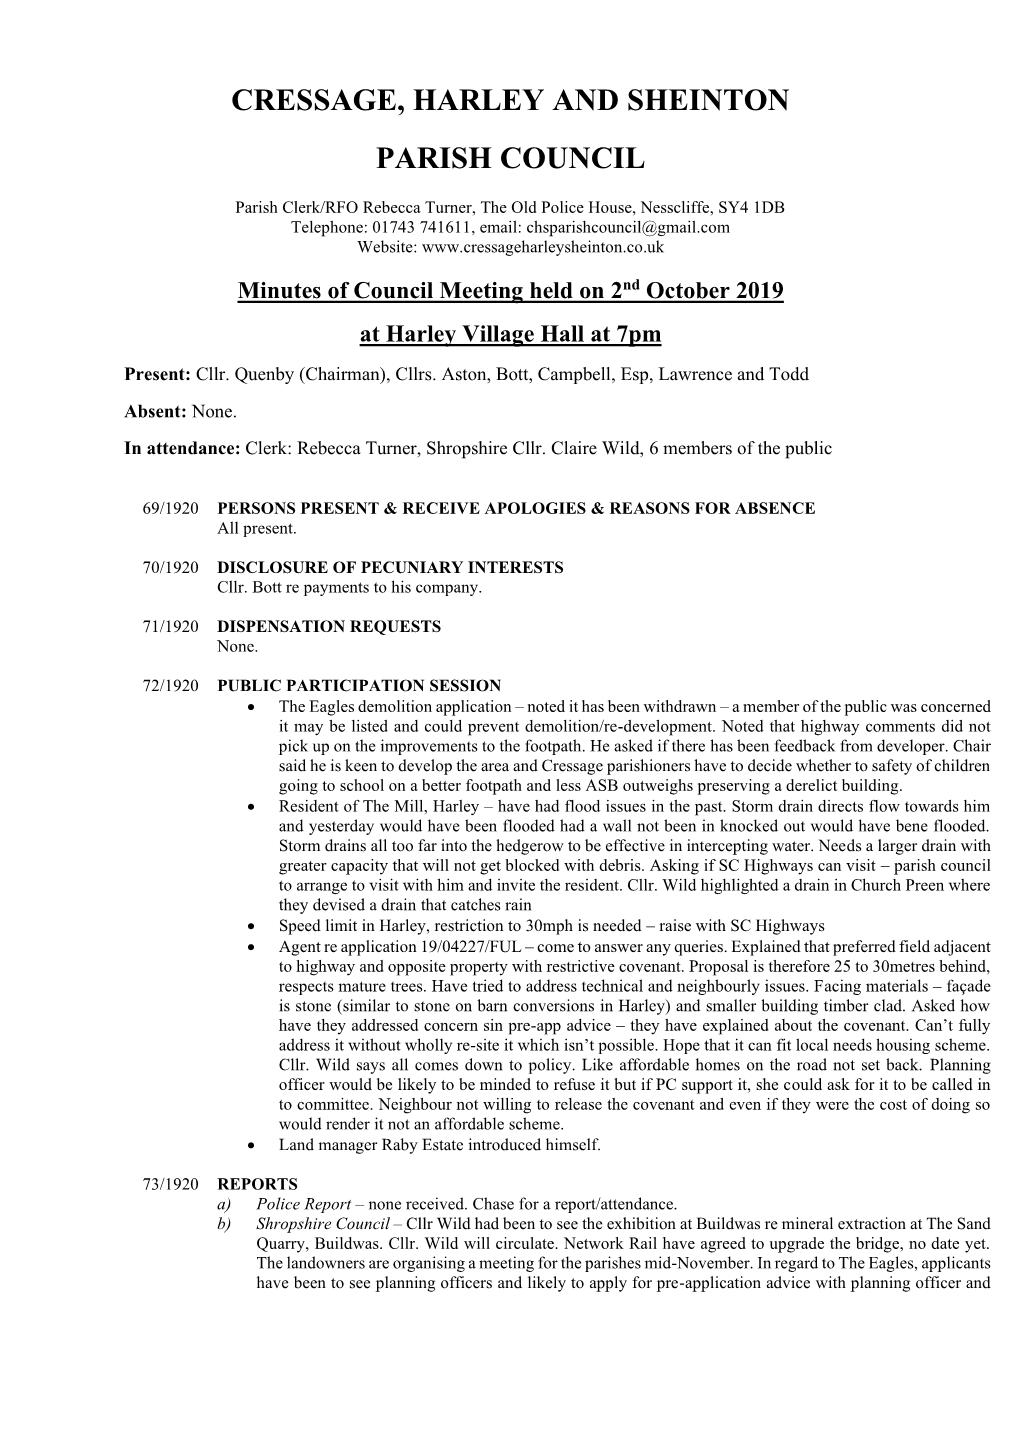 Minutes of Council Meeting Held on 2Nd October 2019 at Harley Village Hall at 7Pm Present: Cllr